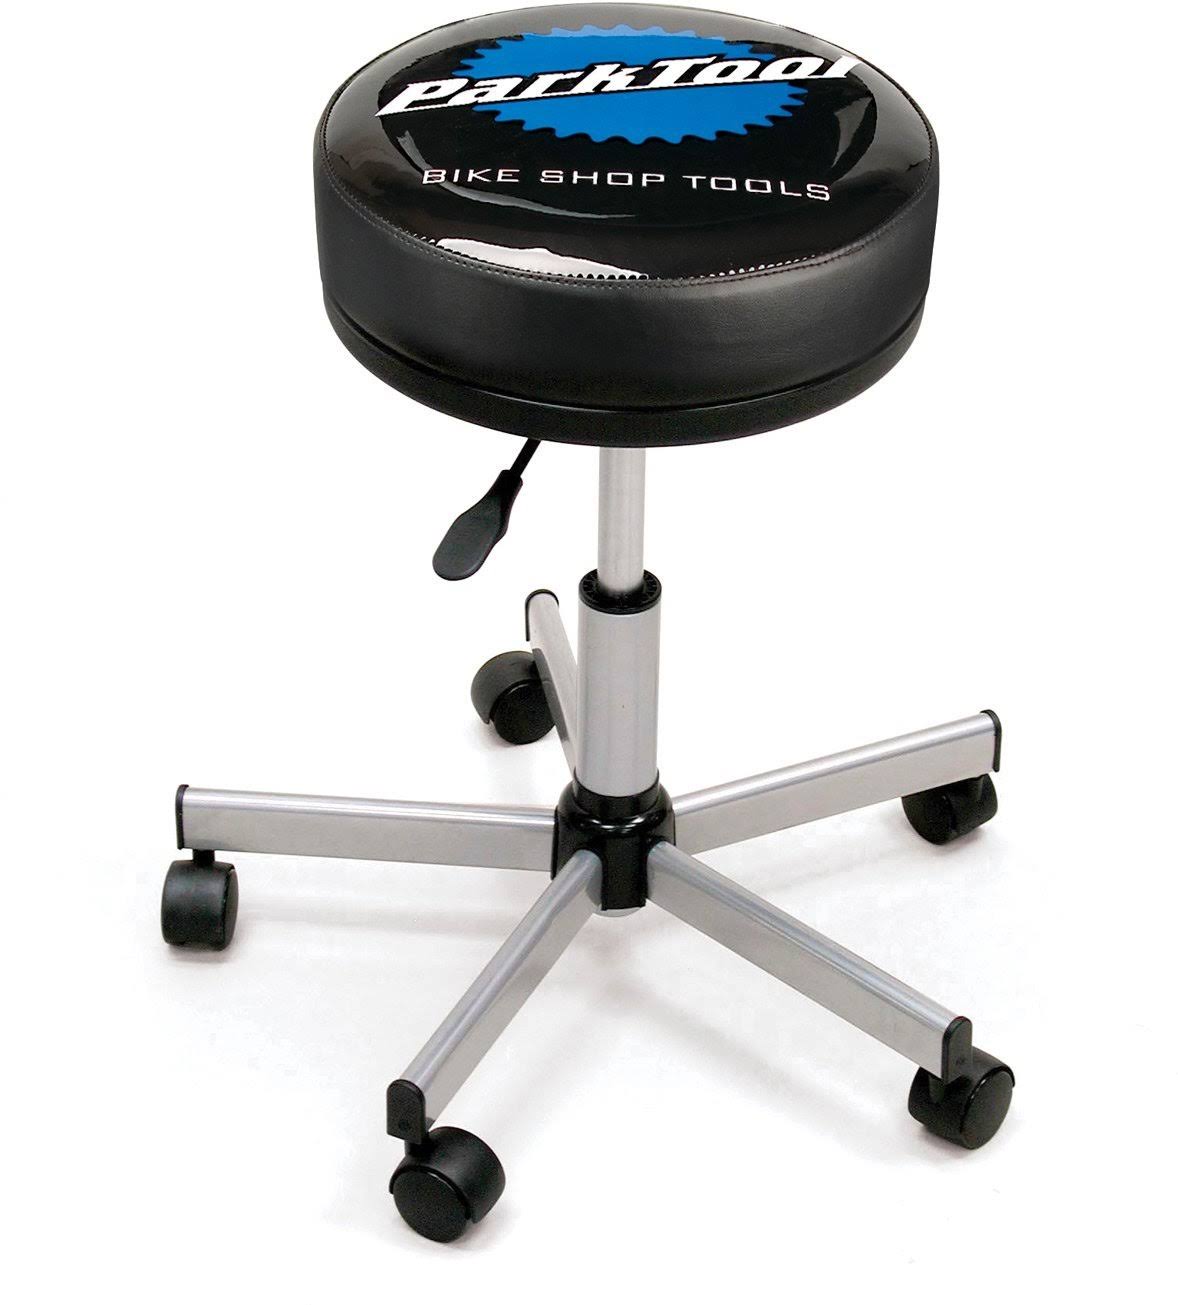 Park Tool Rolling Adjustable Height Shop Stool